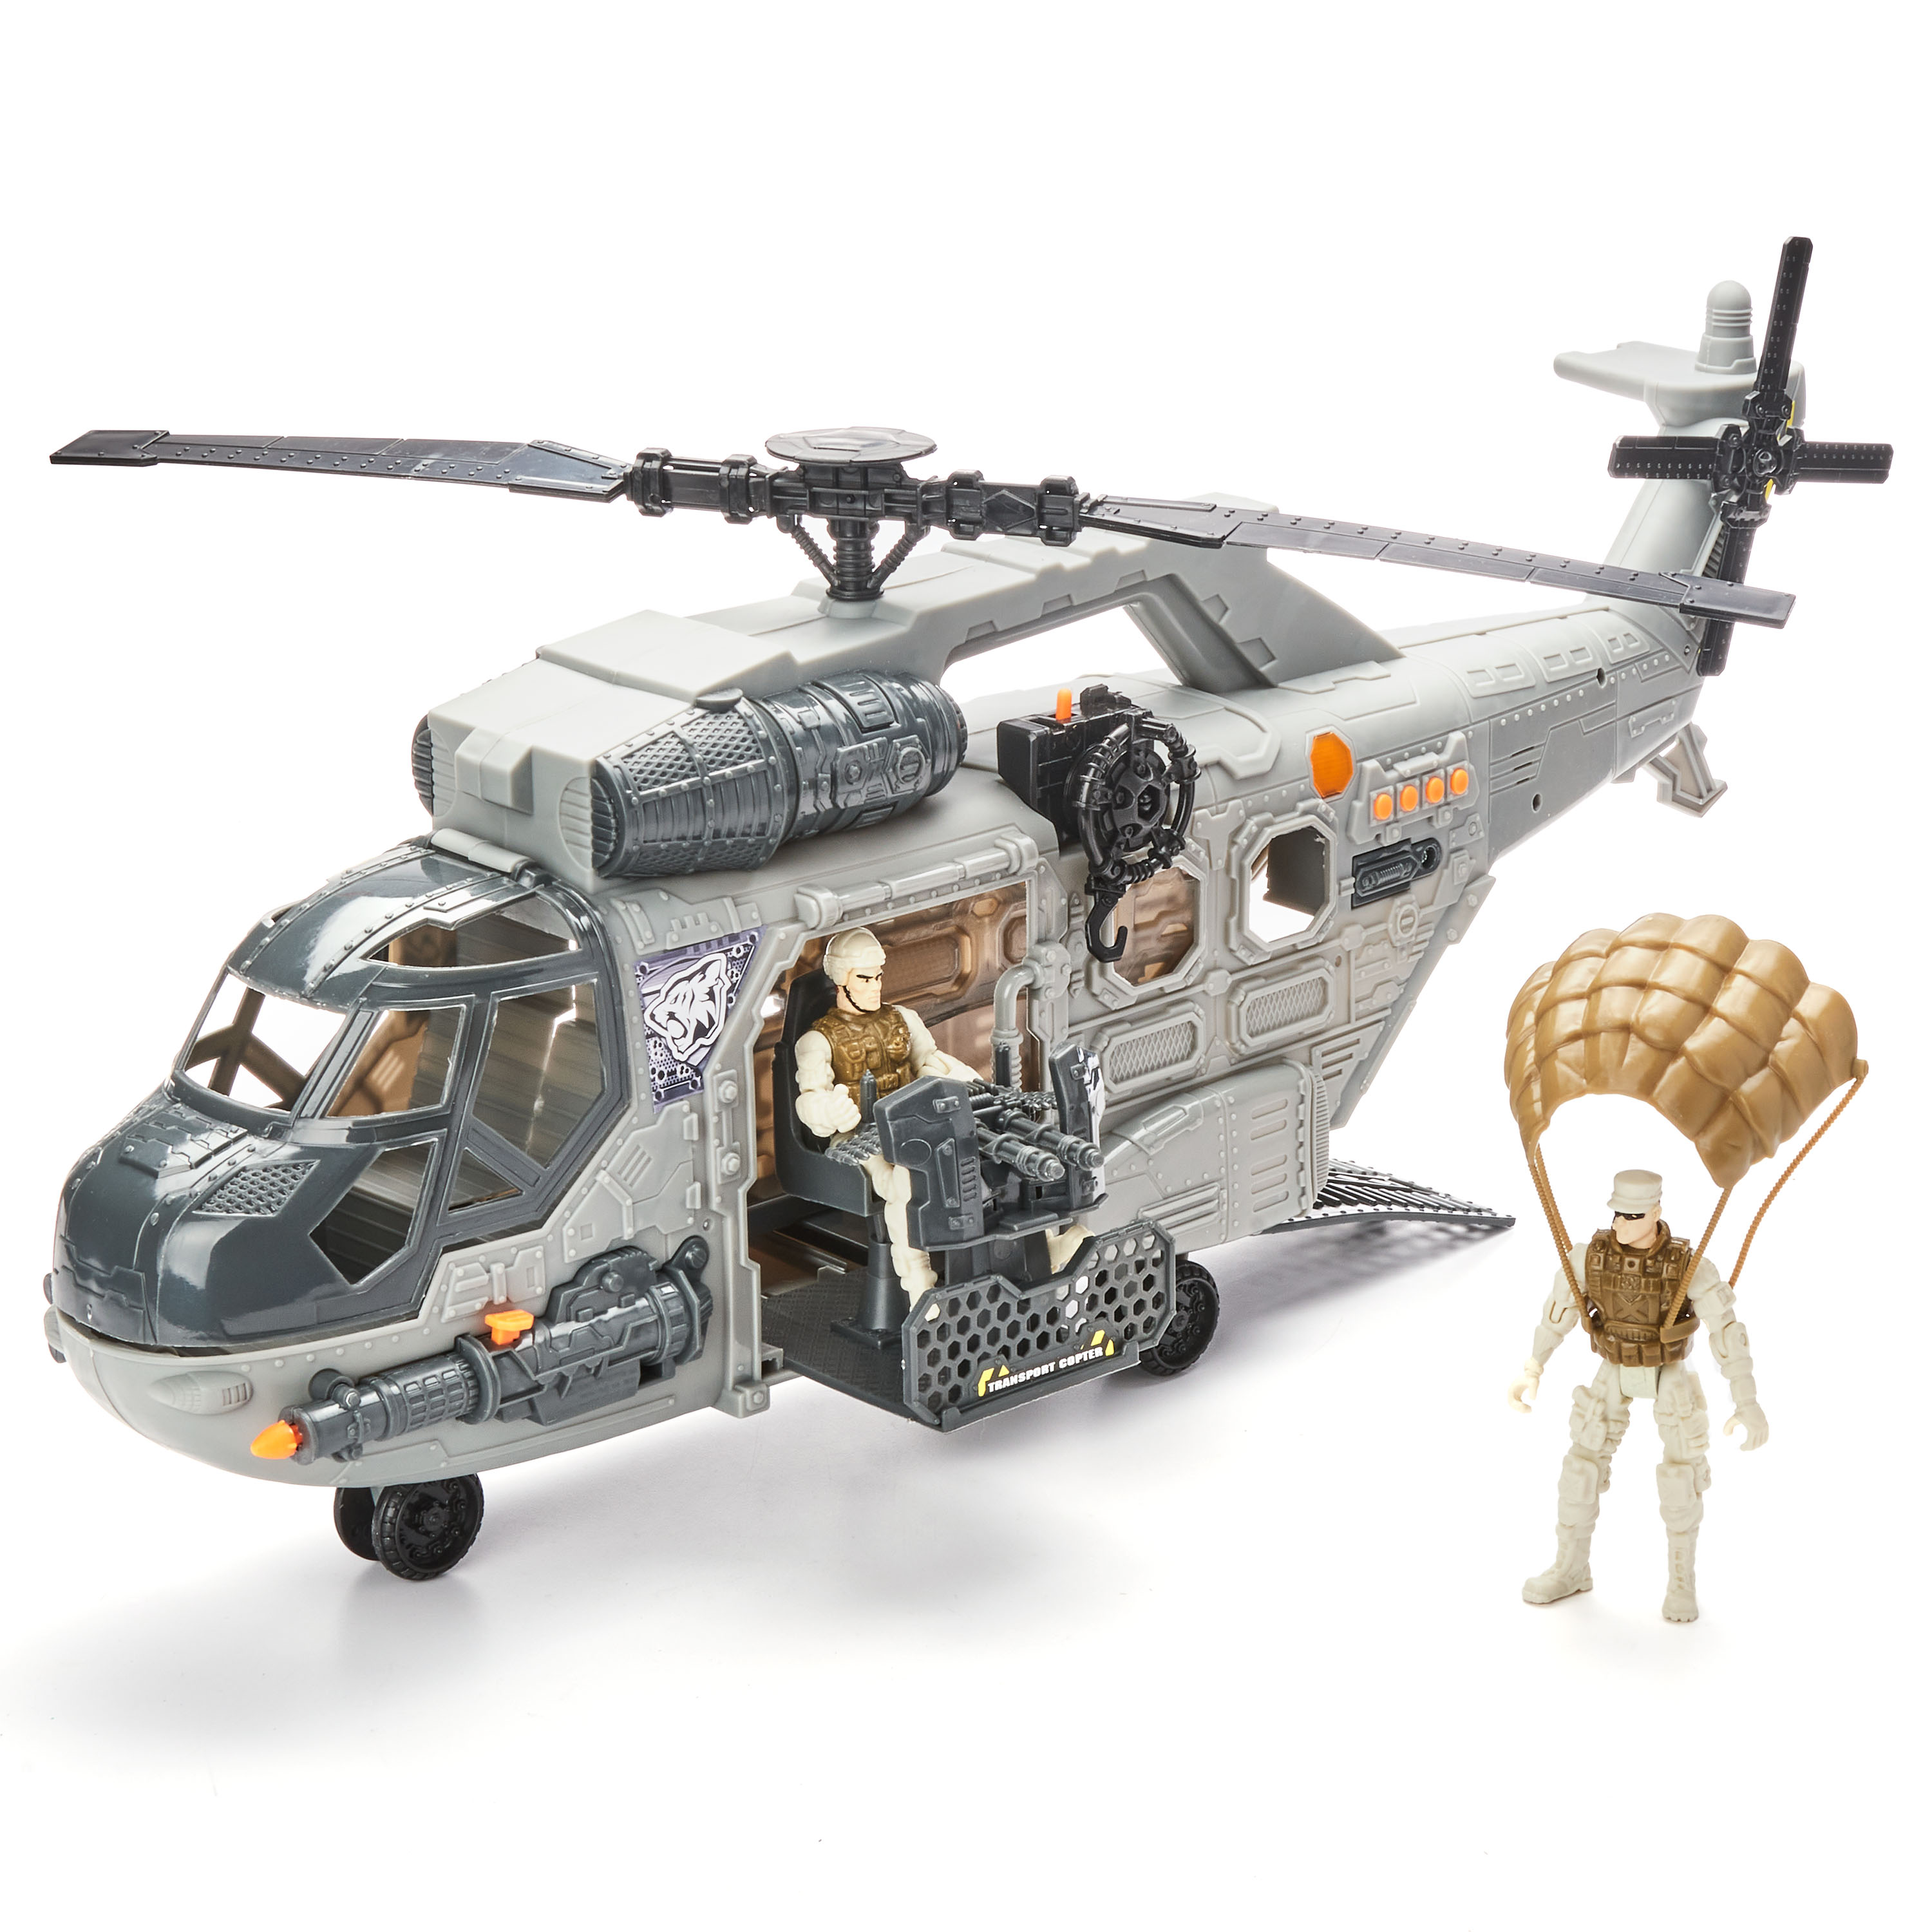 Kid Connection Military Giant Copter Play Set, 57 Pieces - image 3 of 5